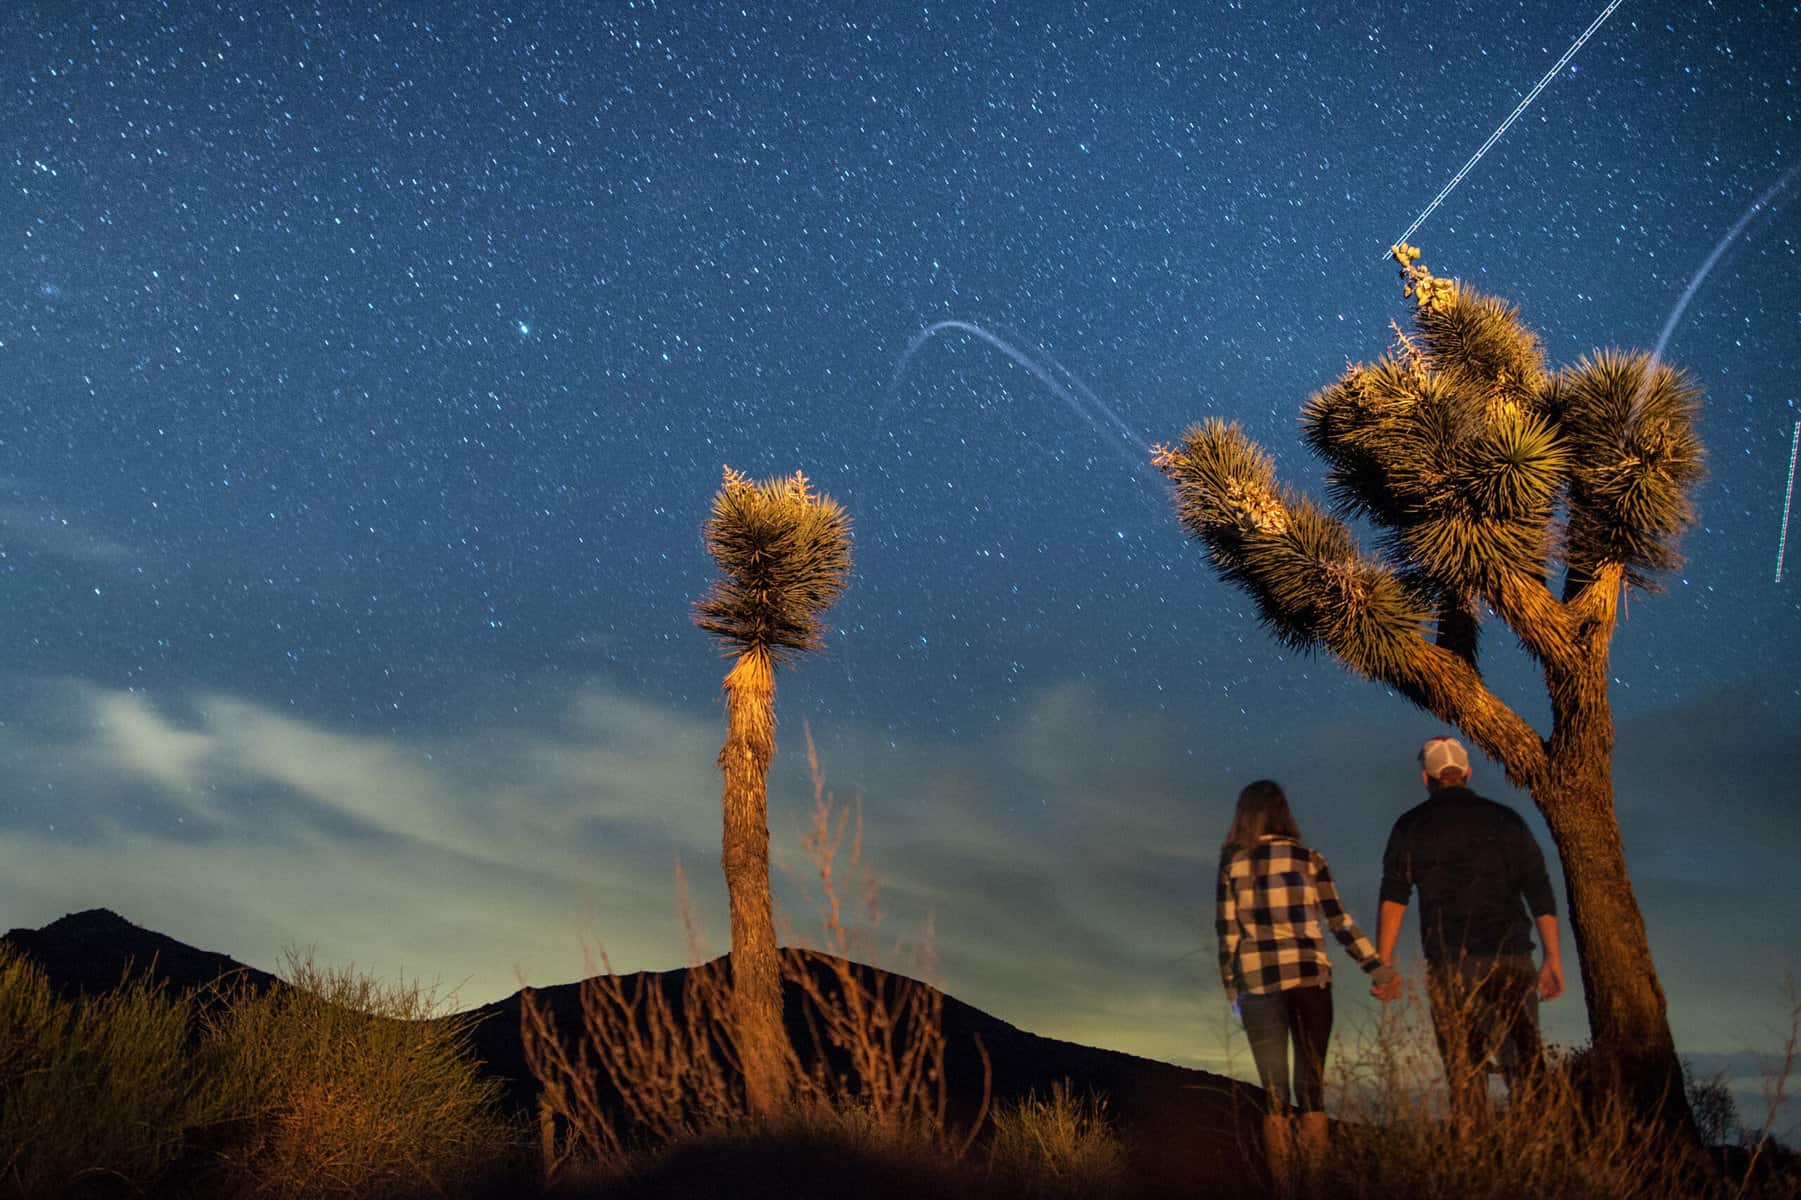 Stargazing is a benefit of visiting Joshua Tree